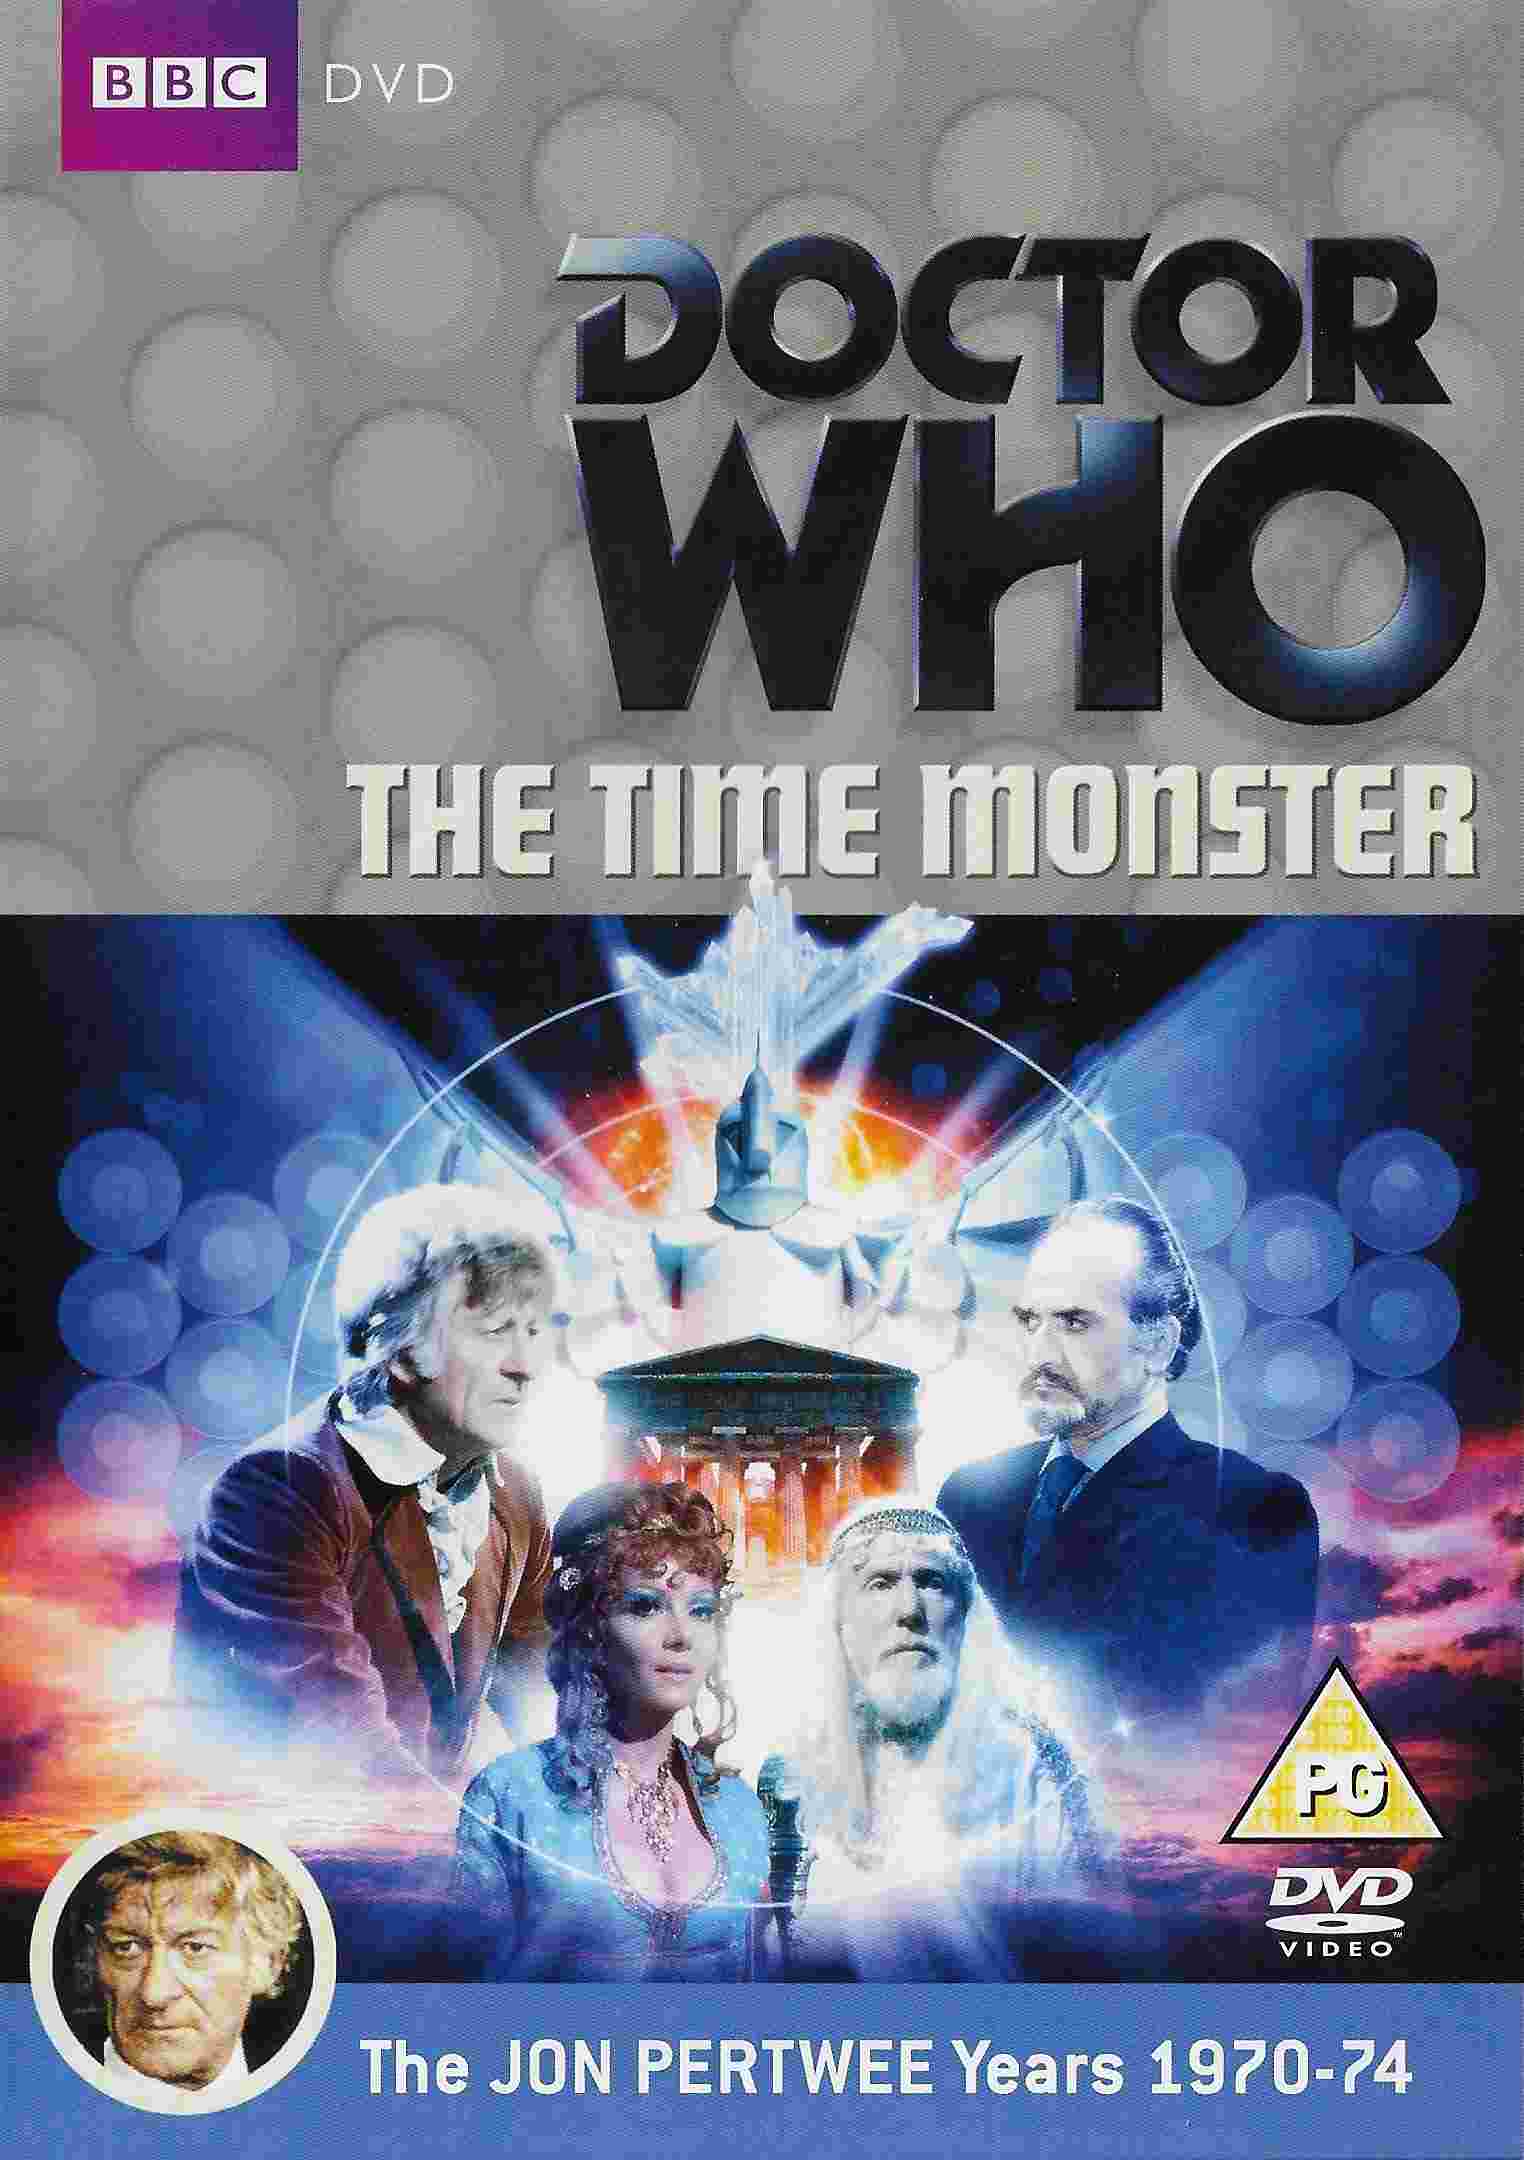 Picture of BBCDVD 2851A Doctor Who - The time monster by artist Robert Sloman from the BBC records and Tapes library